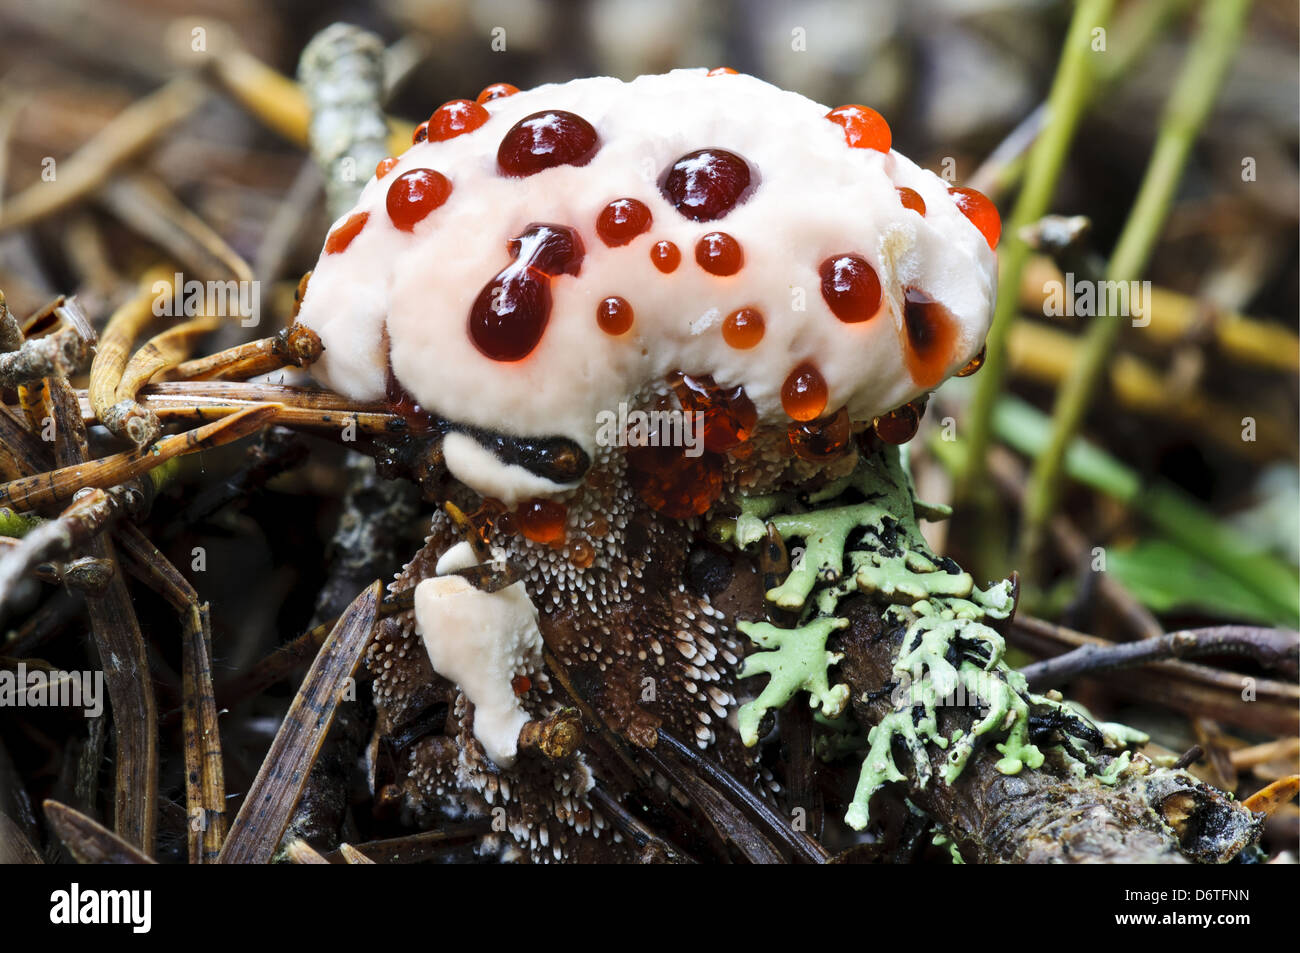 Devil's Tooth Fungus Hydnellum peckii young fruiting body 'bleeding' bright red juice growing through fallen pine needles Loch Stock Photo